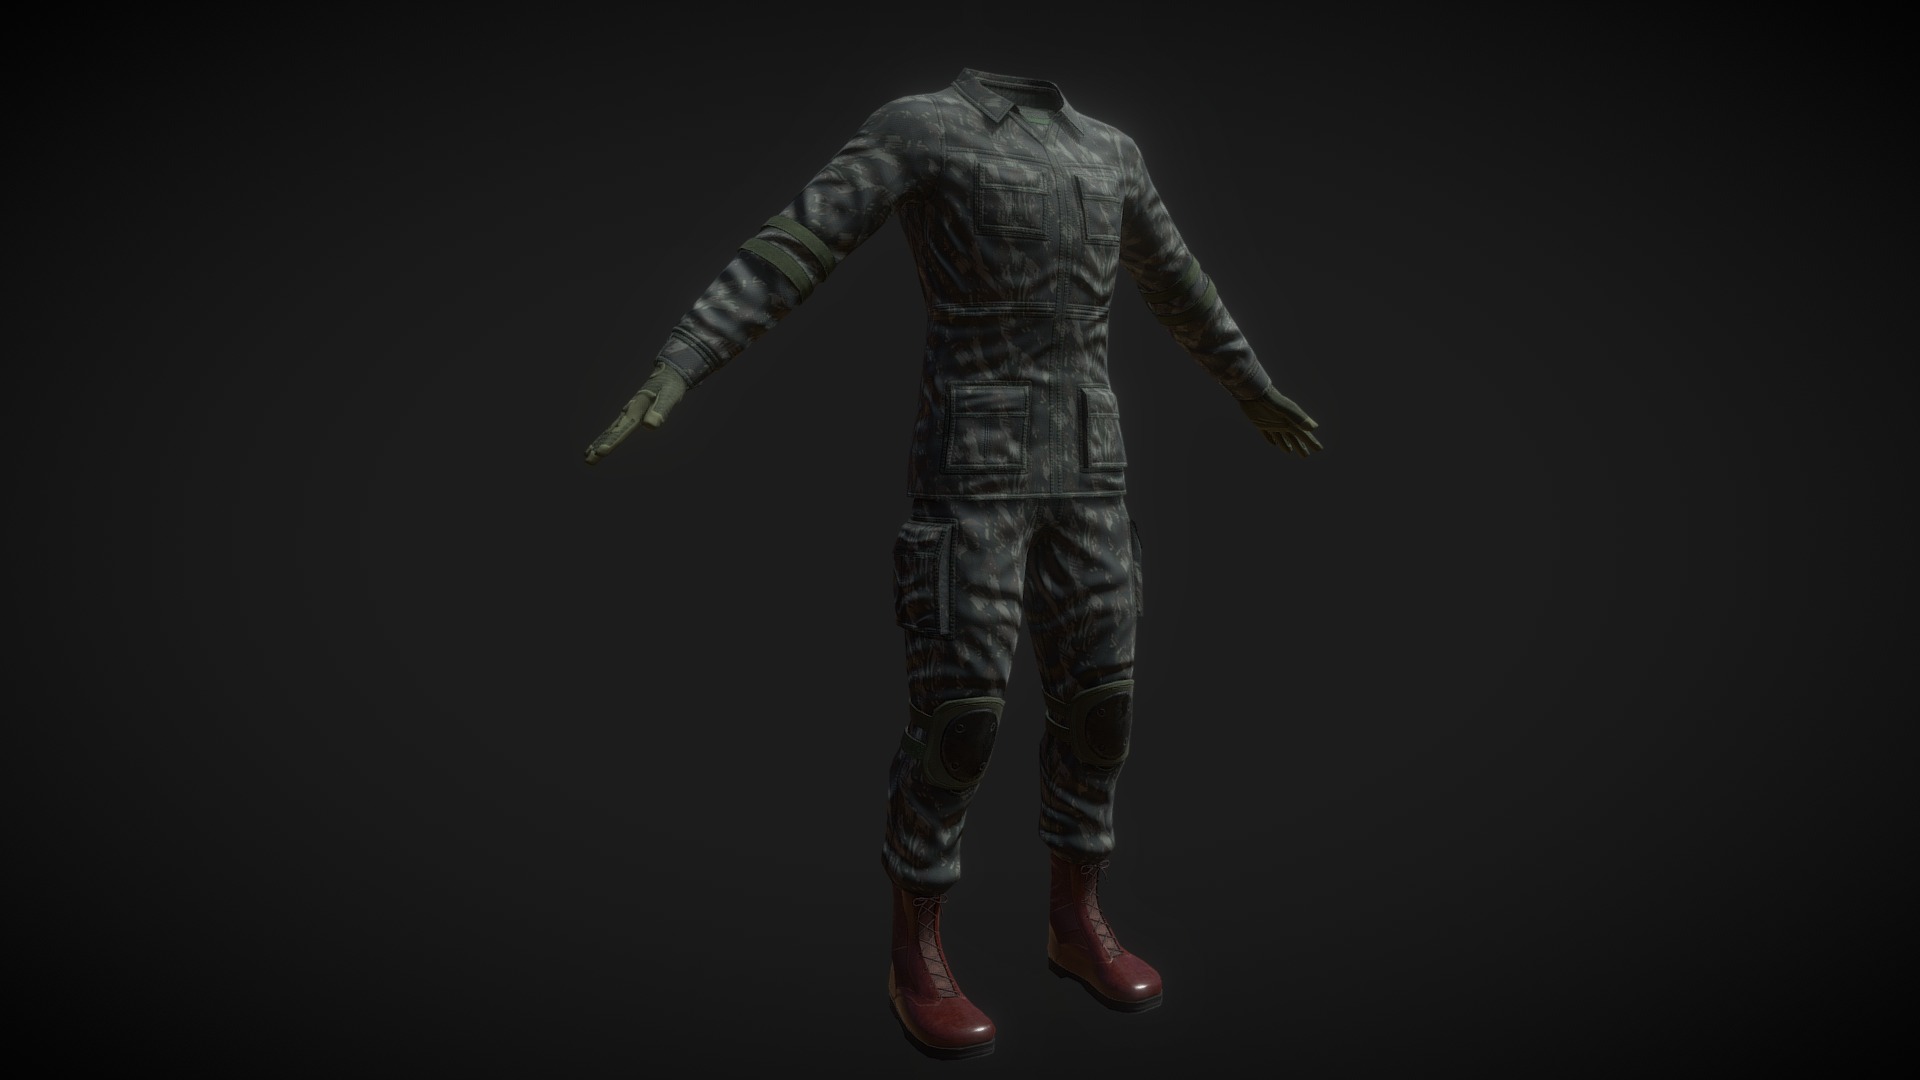 3D model Farda EB v0.2 - This is a 3D model of the Farda EB v0.2. The 3D model is about a person wearing a garment.